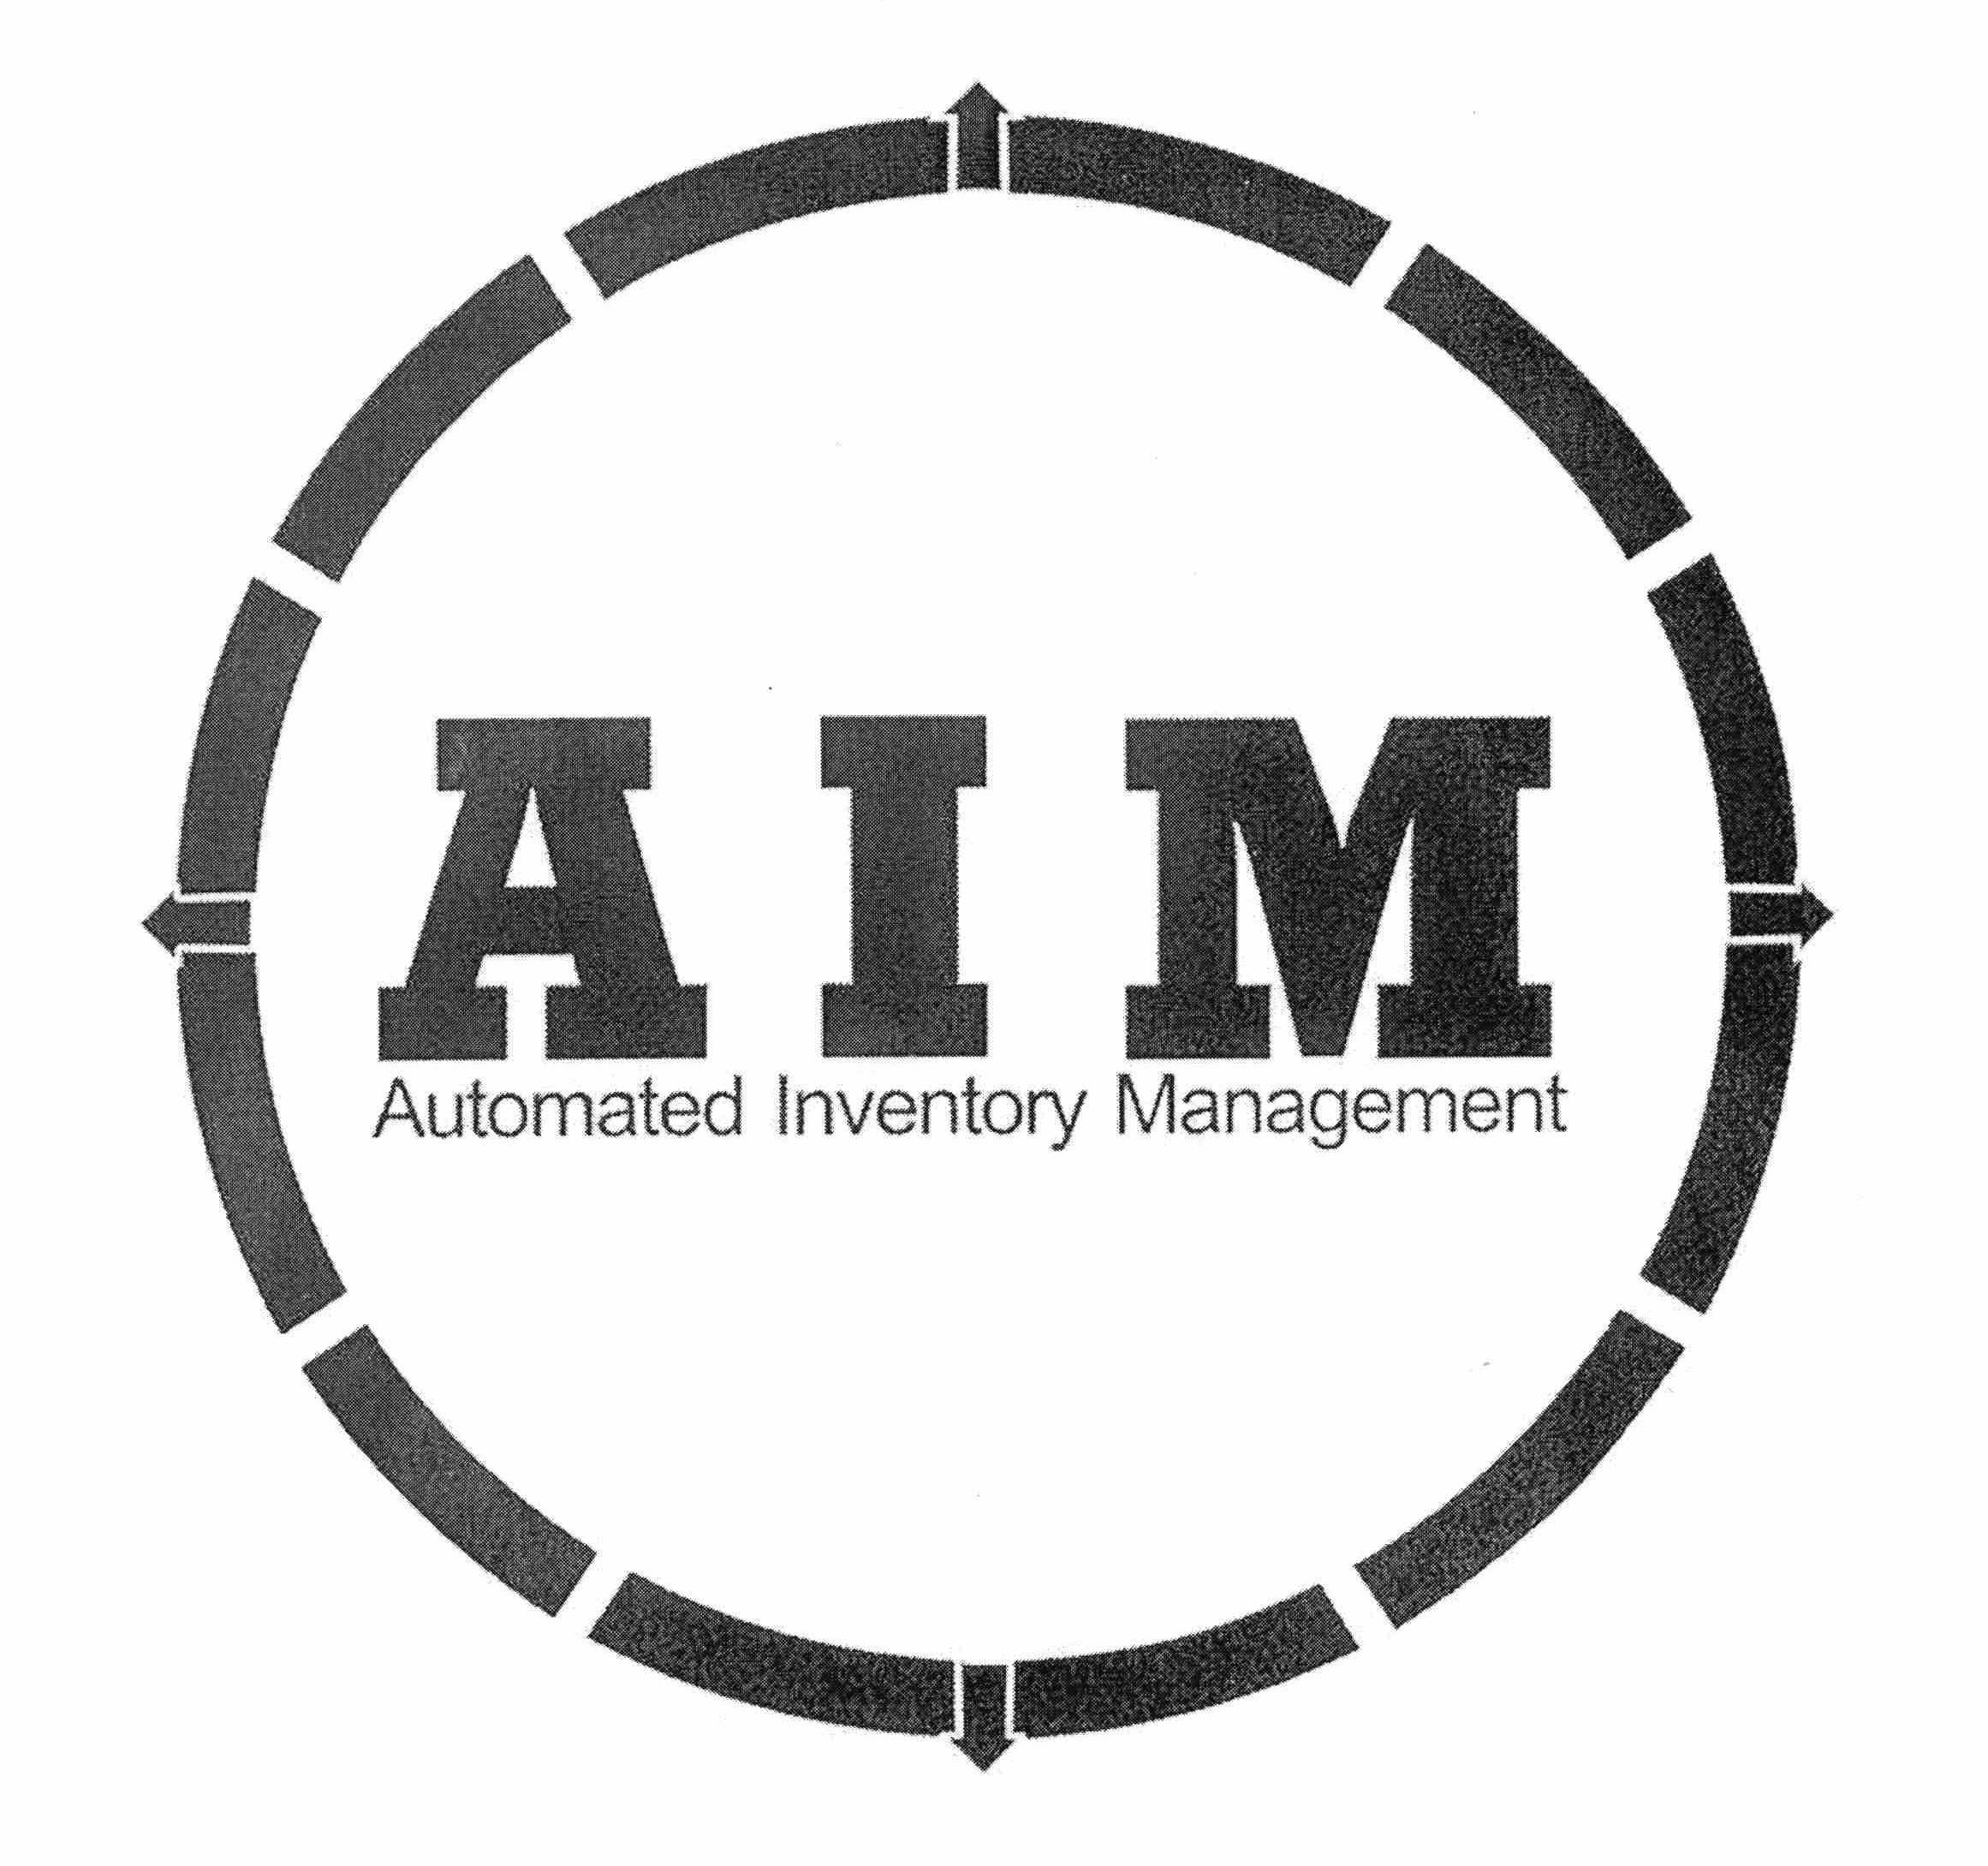  AIM AUTOMATED INVENTORY MANAGEMENT